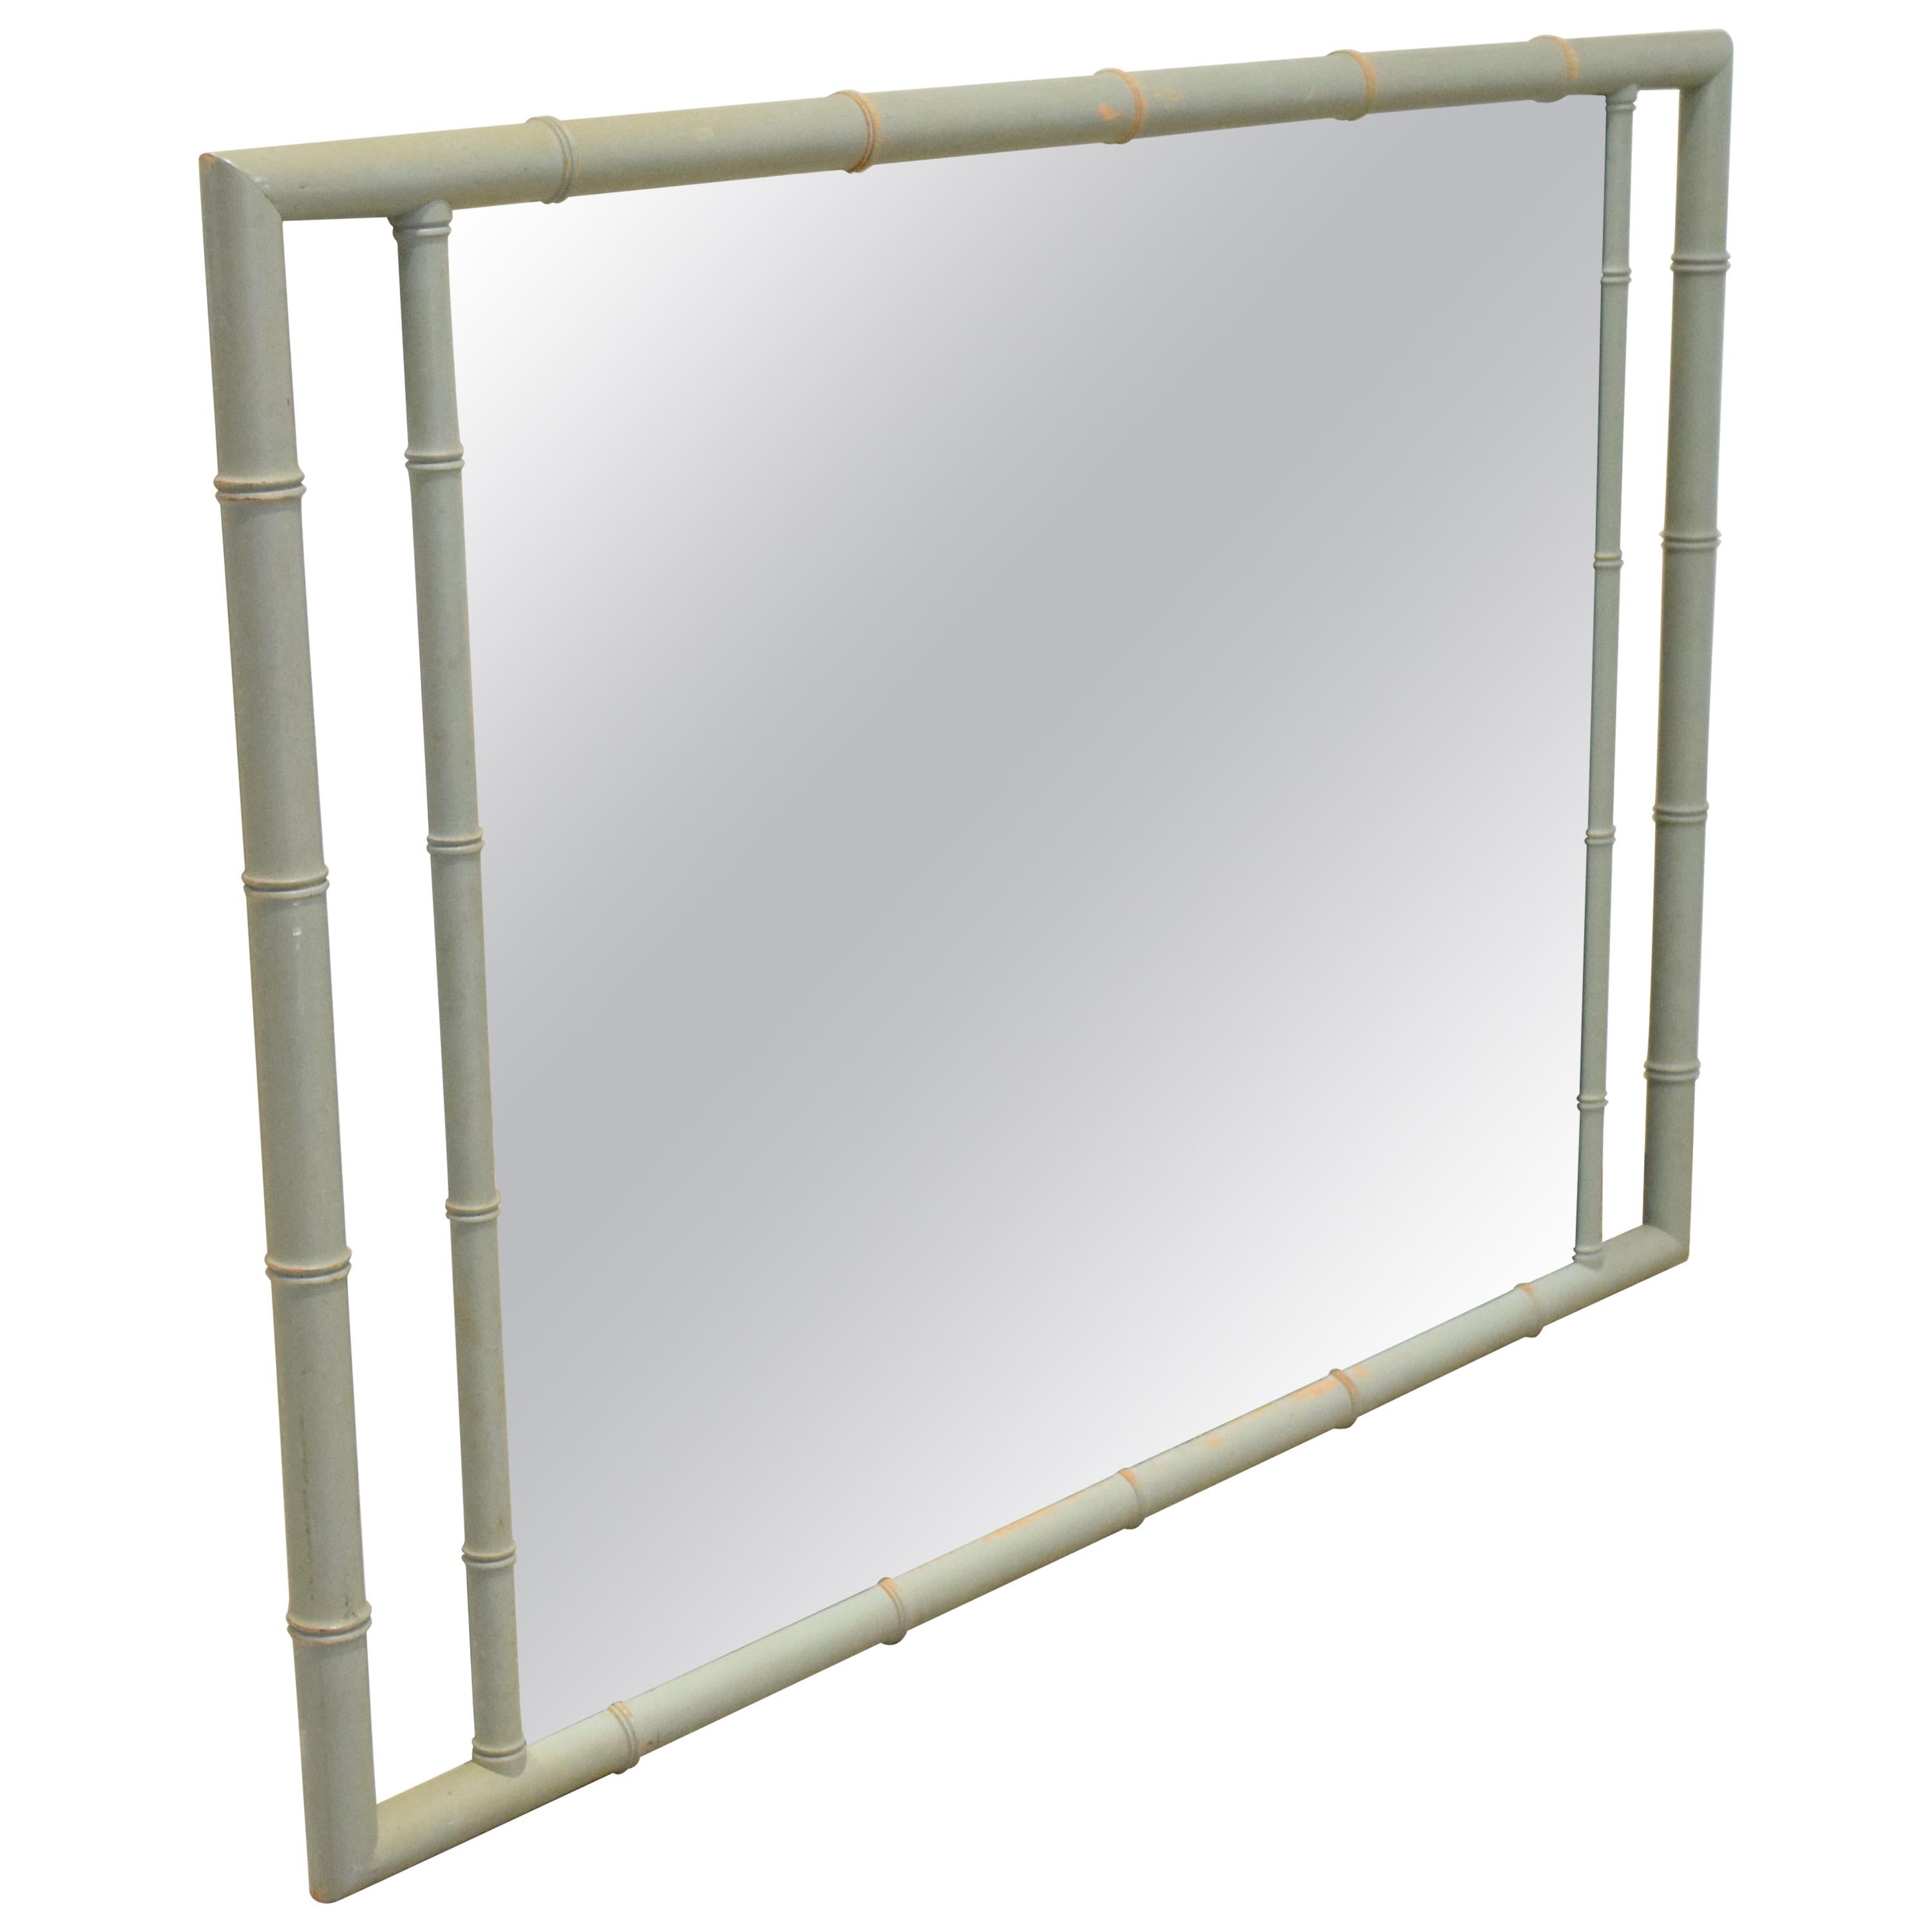 Large faux bamboo mirror by Kittinger. Signed to back with manufacturer's stamp and sticker.